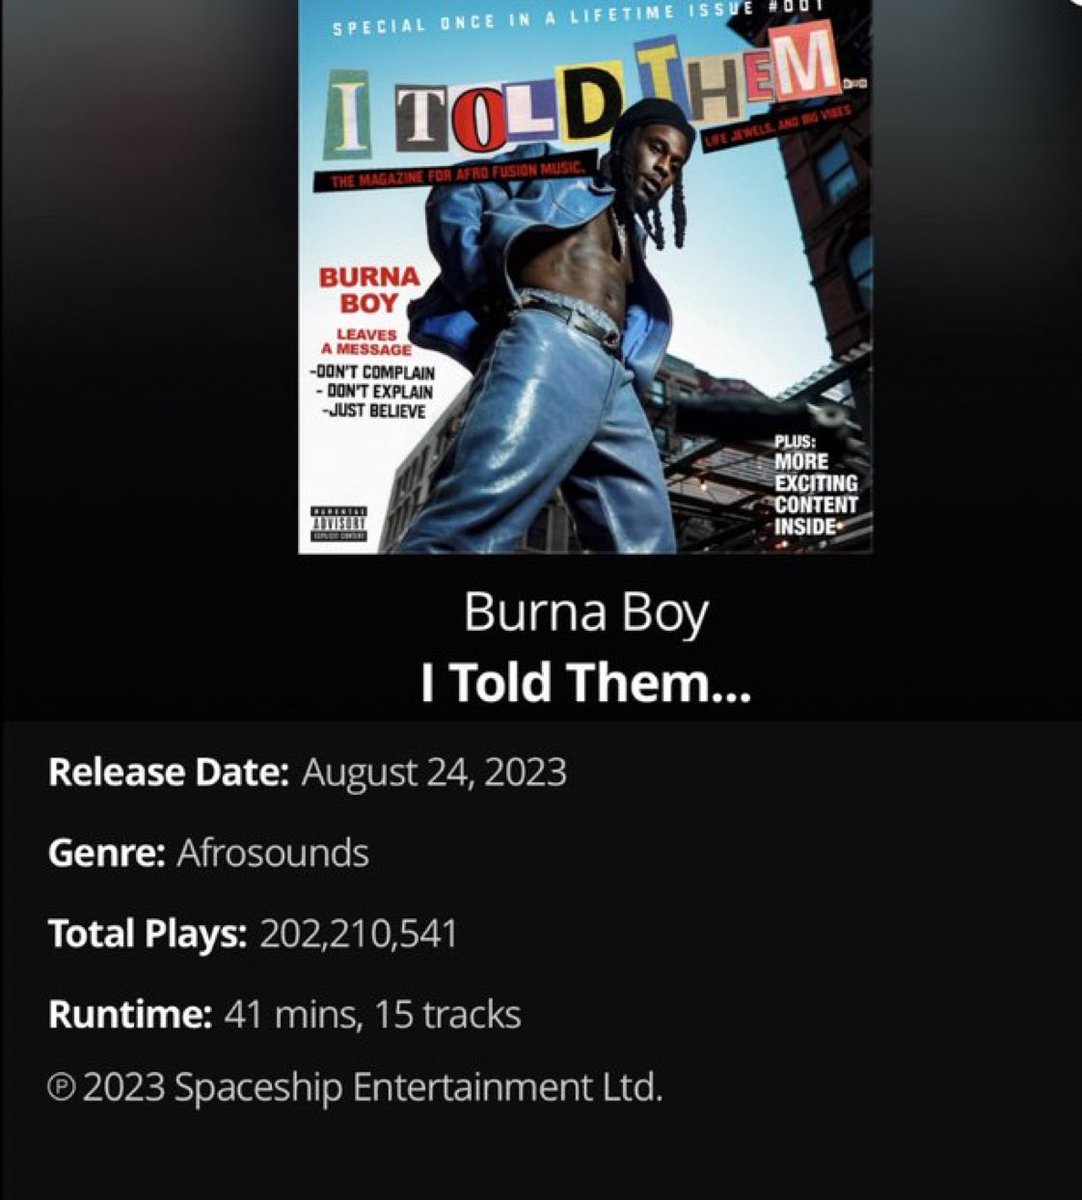 .@burnaboy’s “I Told Them…” album has now surpassed 200 million total plays on Audiomack.